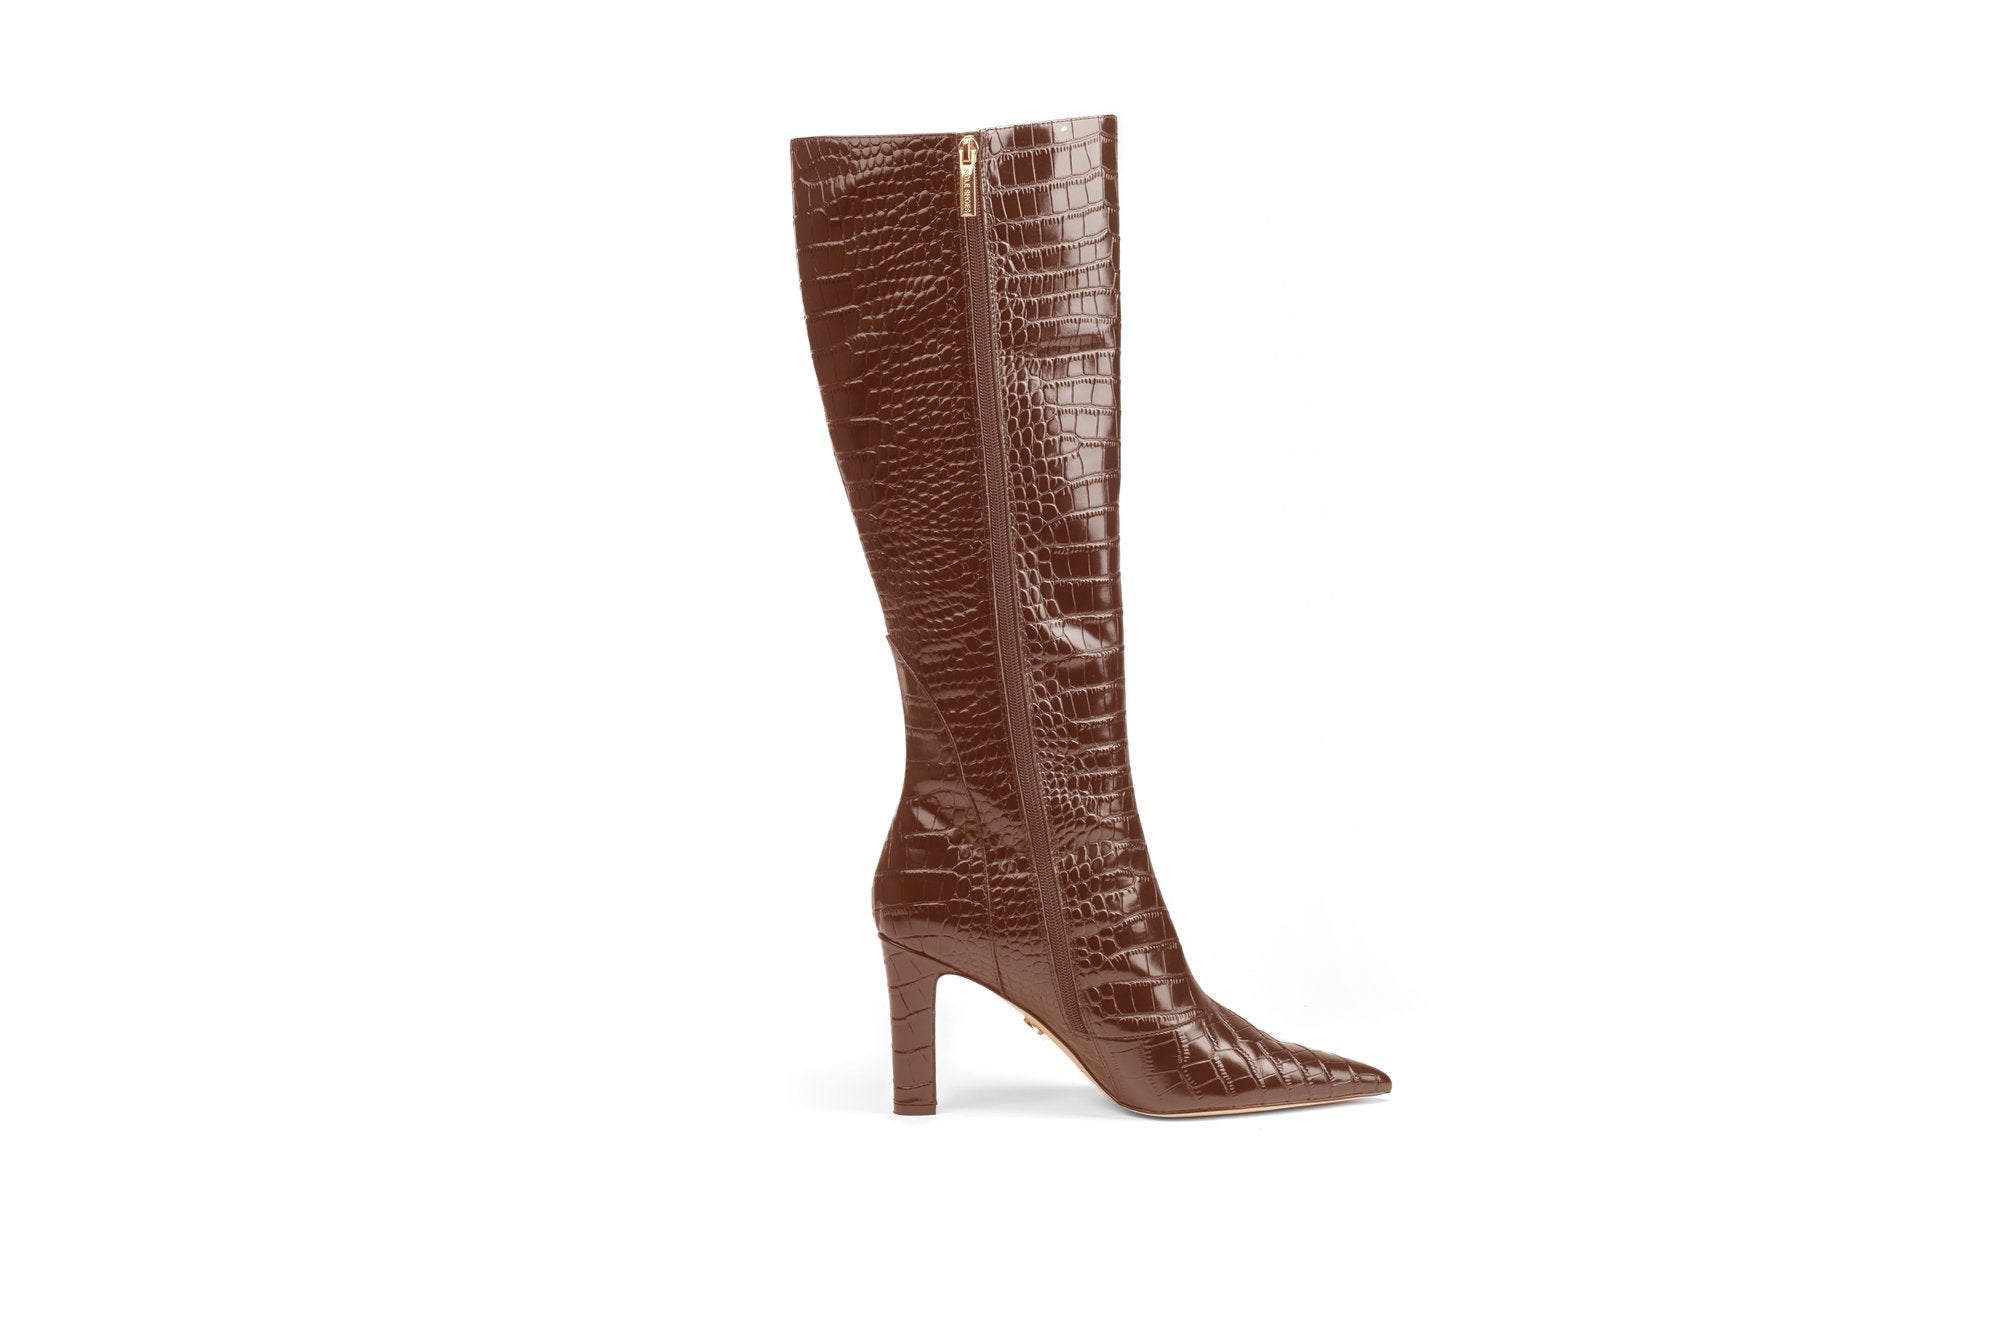 Fantasy Croc Leather Knee-high boots Brown Boots by Sole Shoes NZ LB7-36